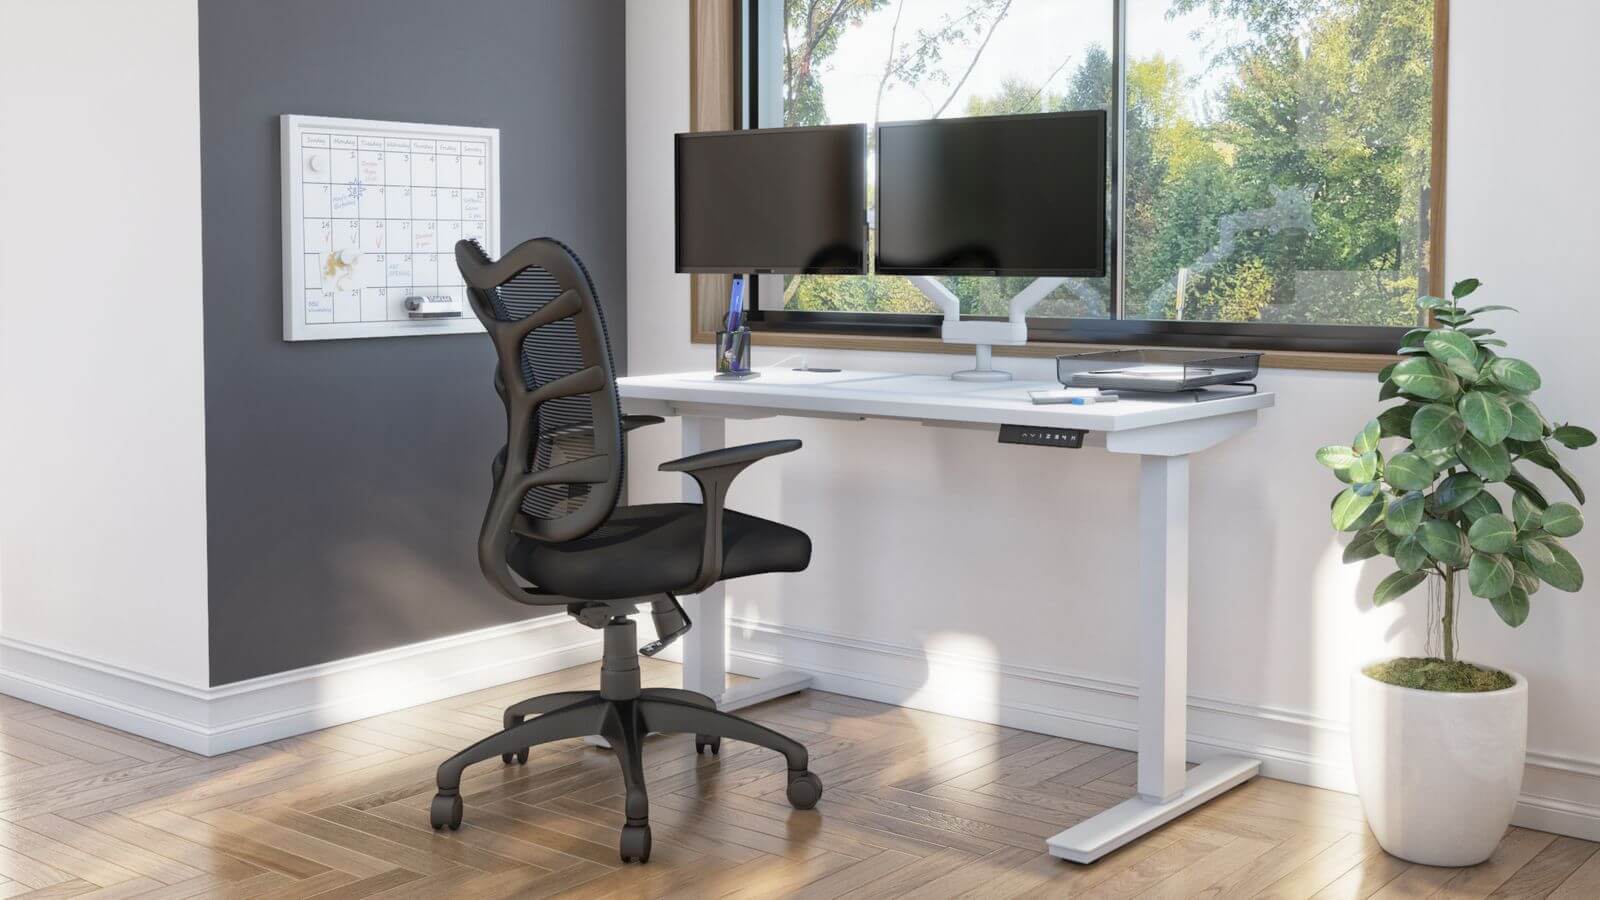 Bestar standing desk with monitor arms